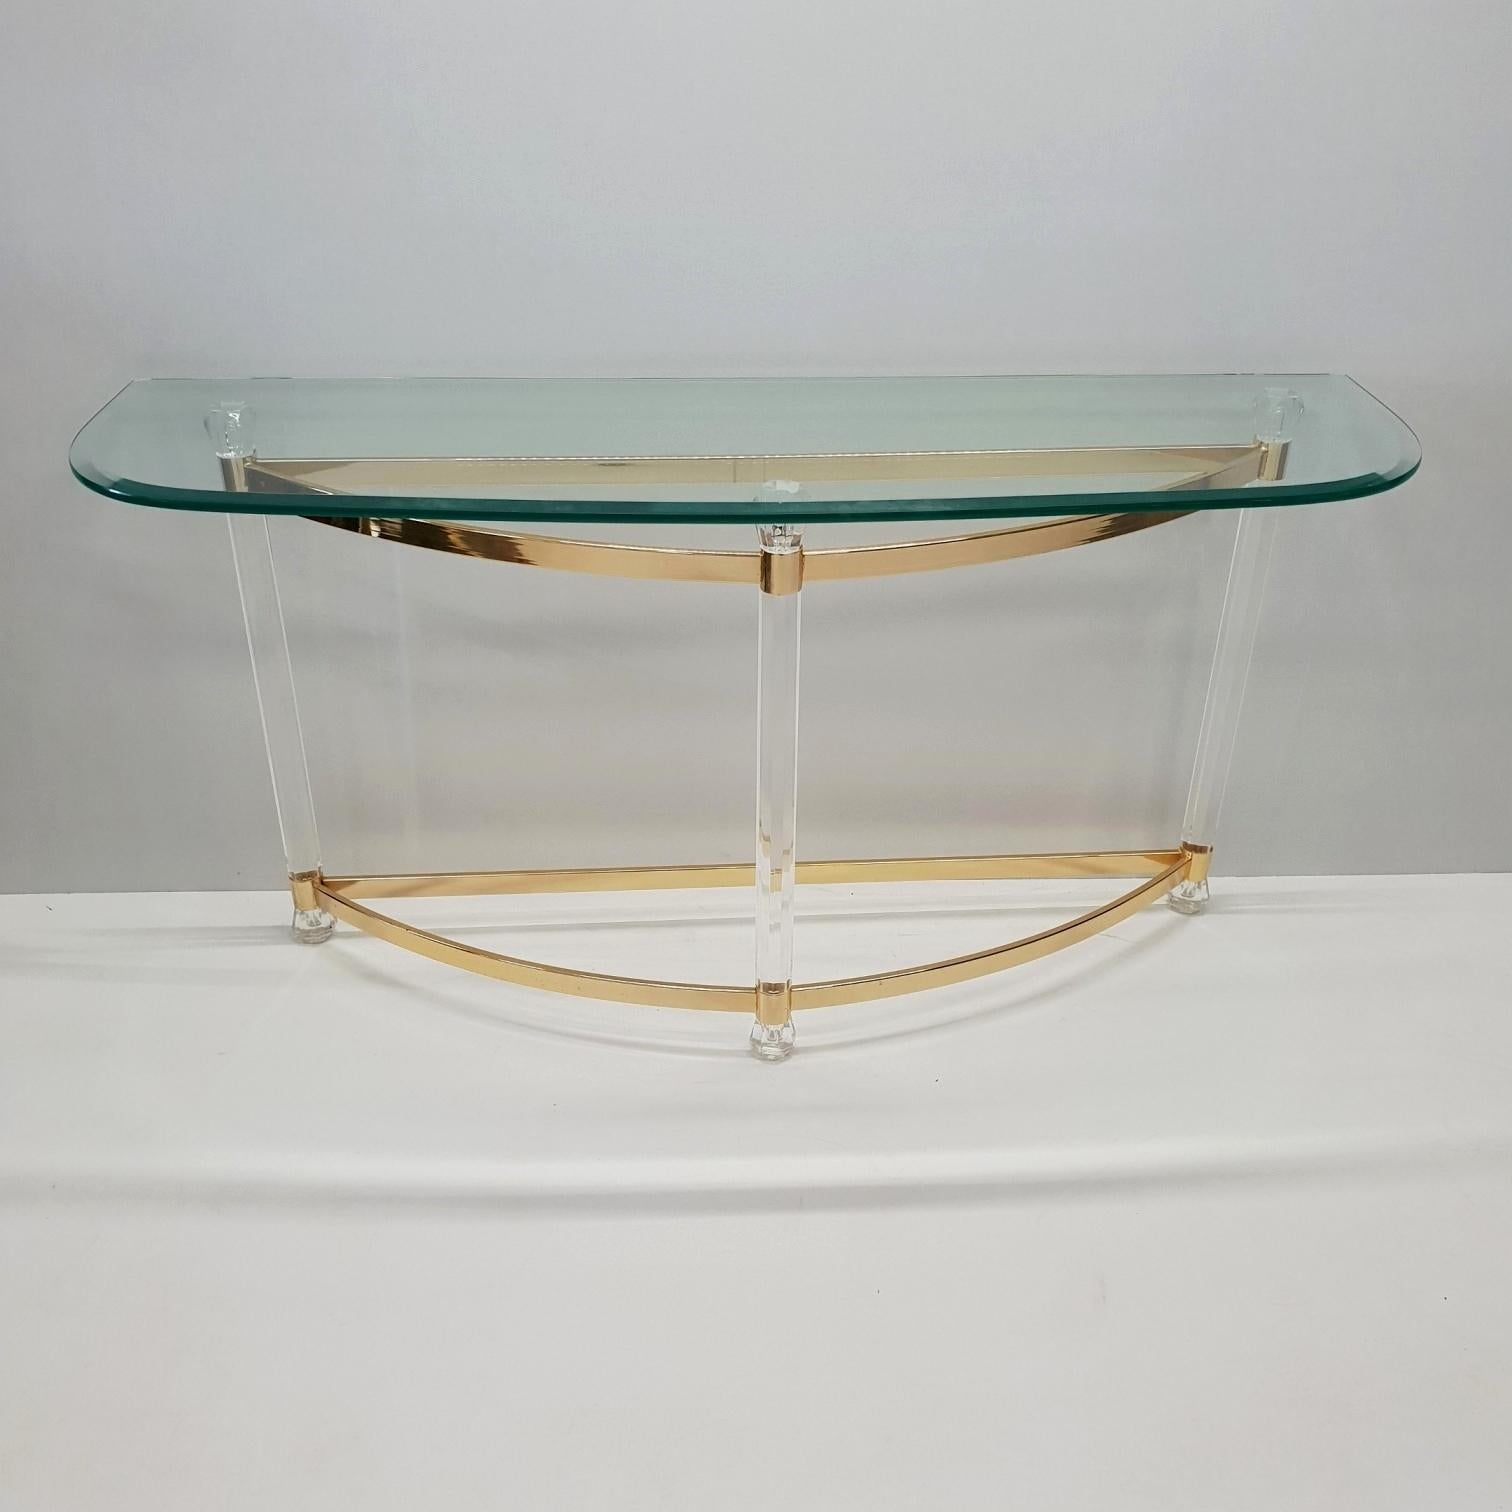 French brass and Lucite console table with facet glass top, 1970s
In very good, complete and original vintage condition.